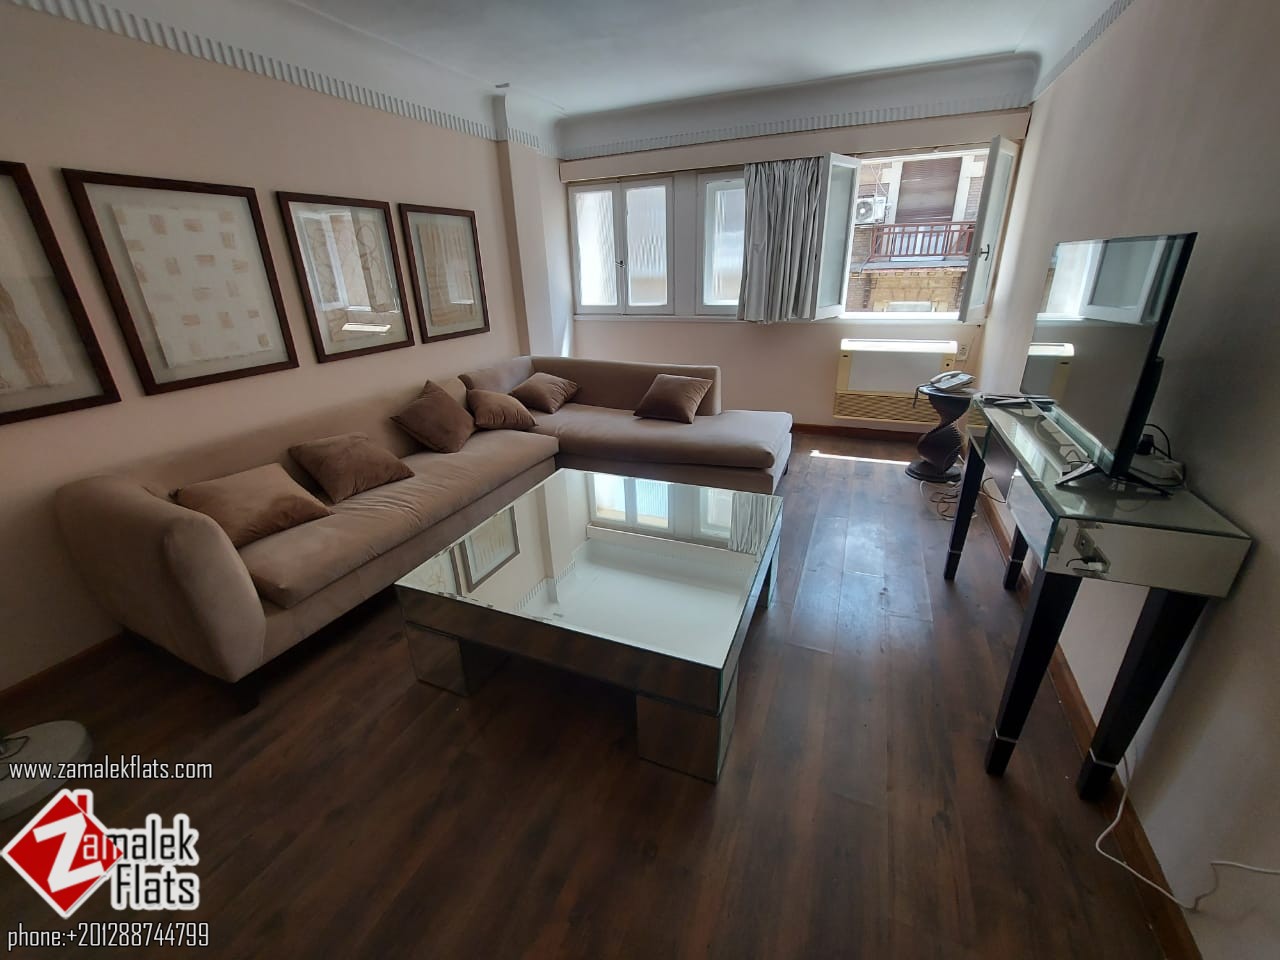 Fully Furnished Apartment for Rent in Zamlek